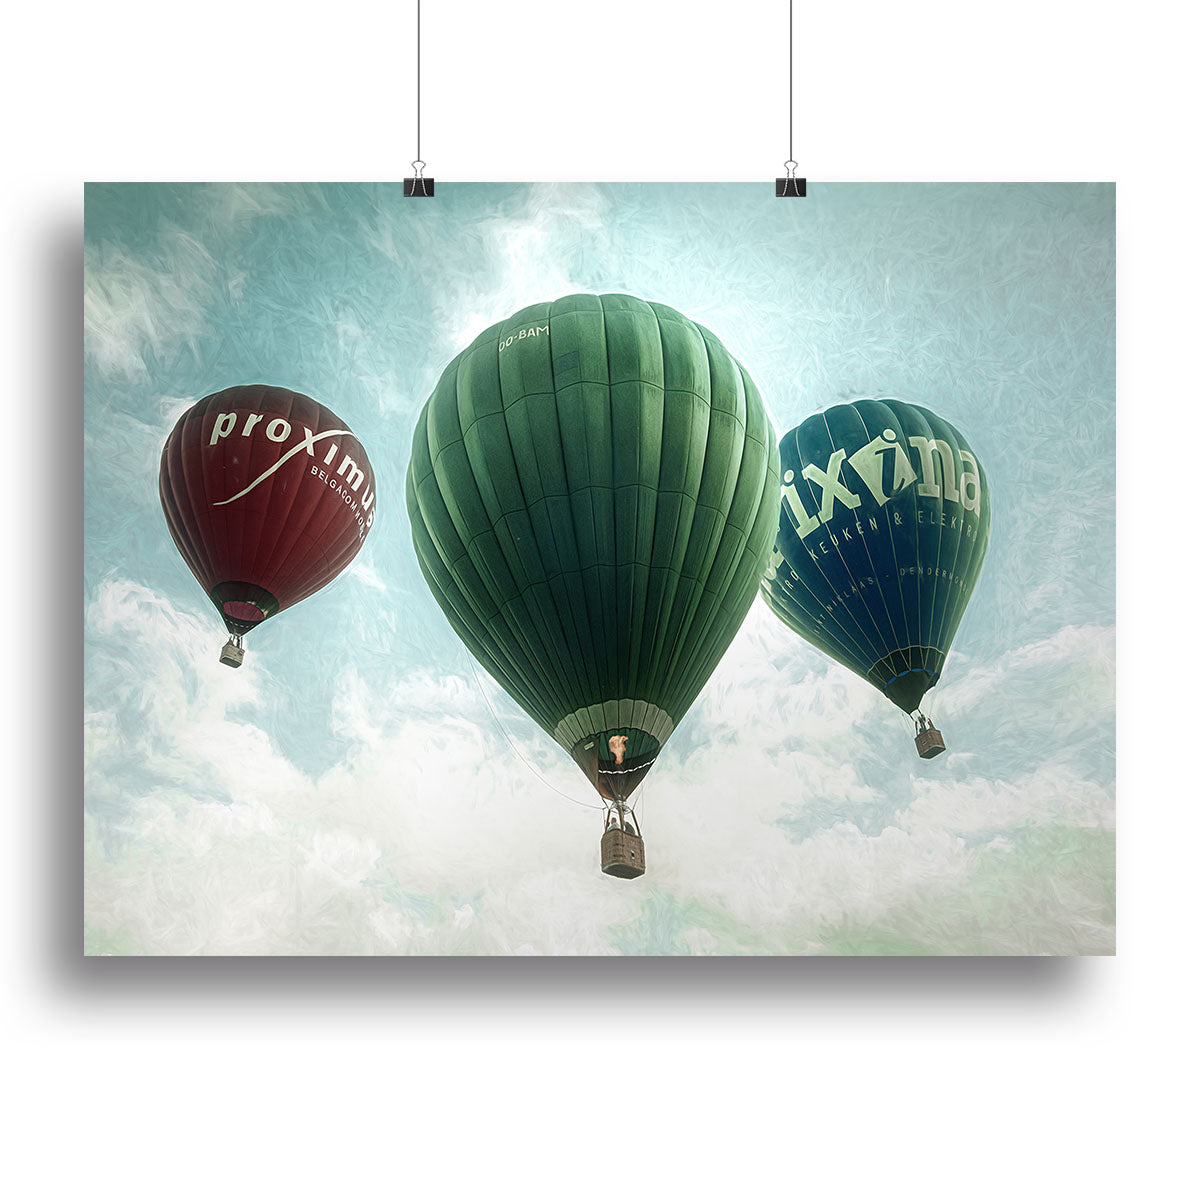 Full colour Canvas Print or Poster - 1x - 2